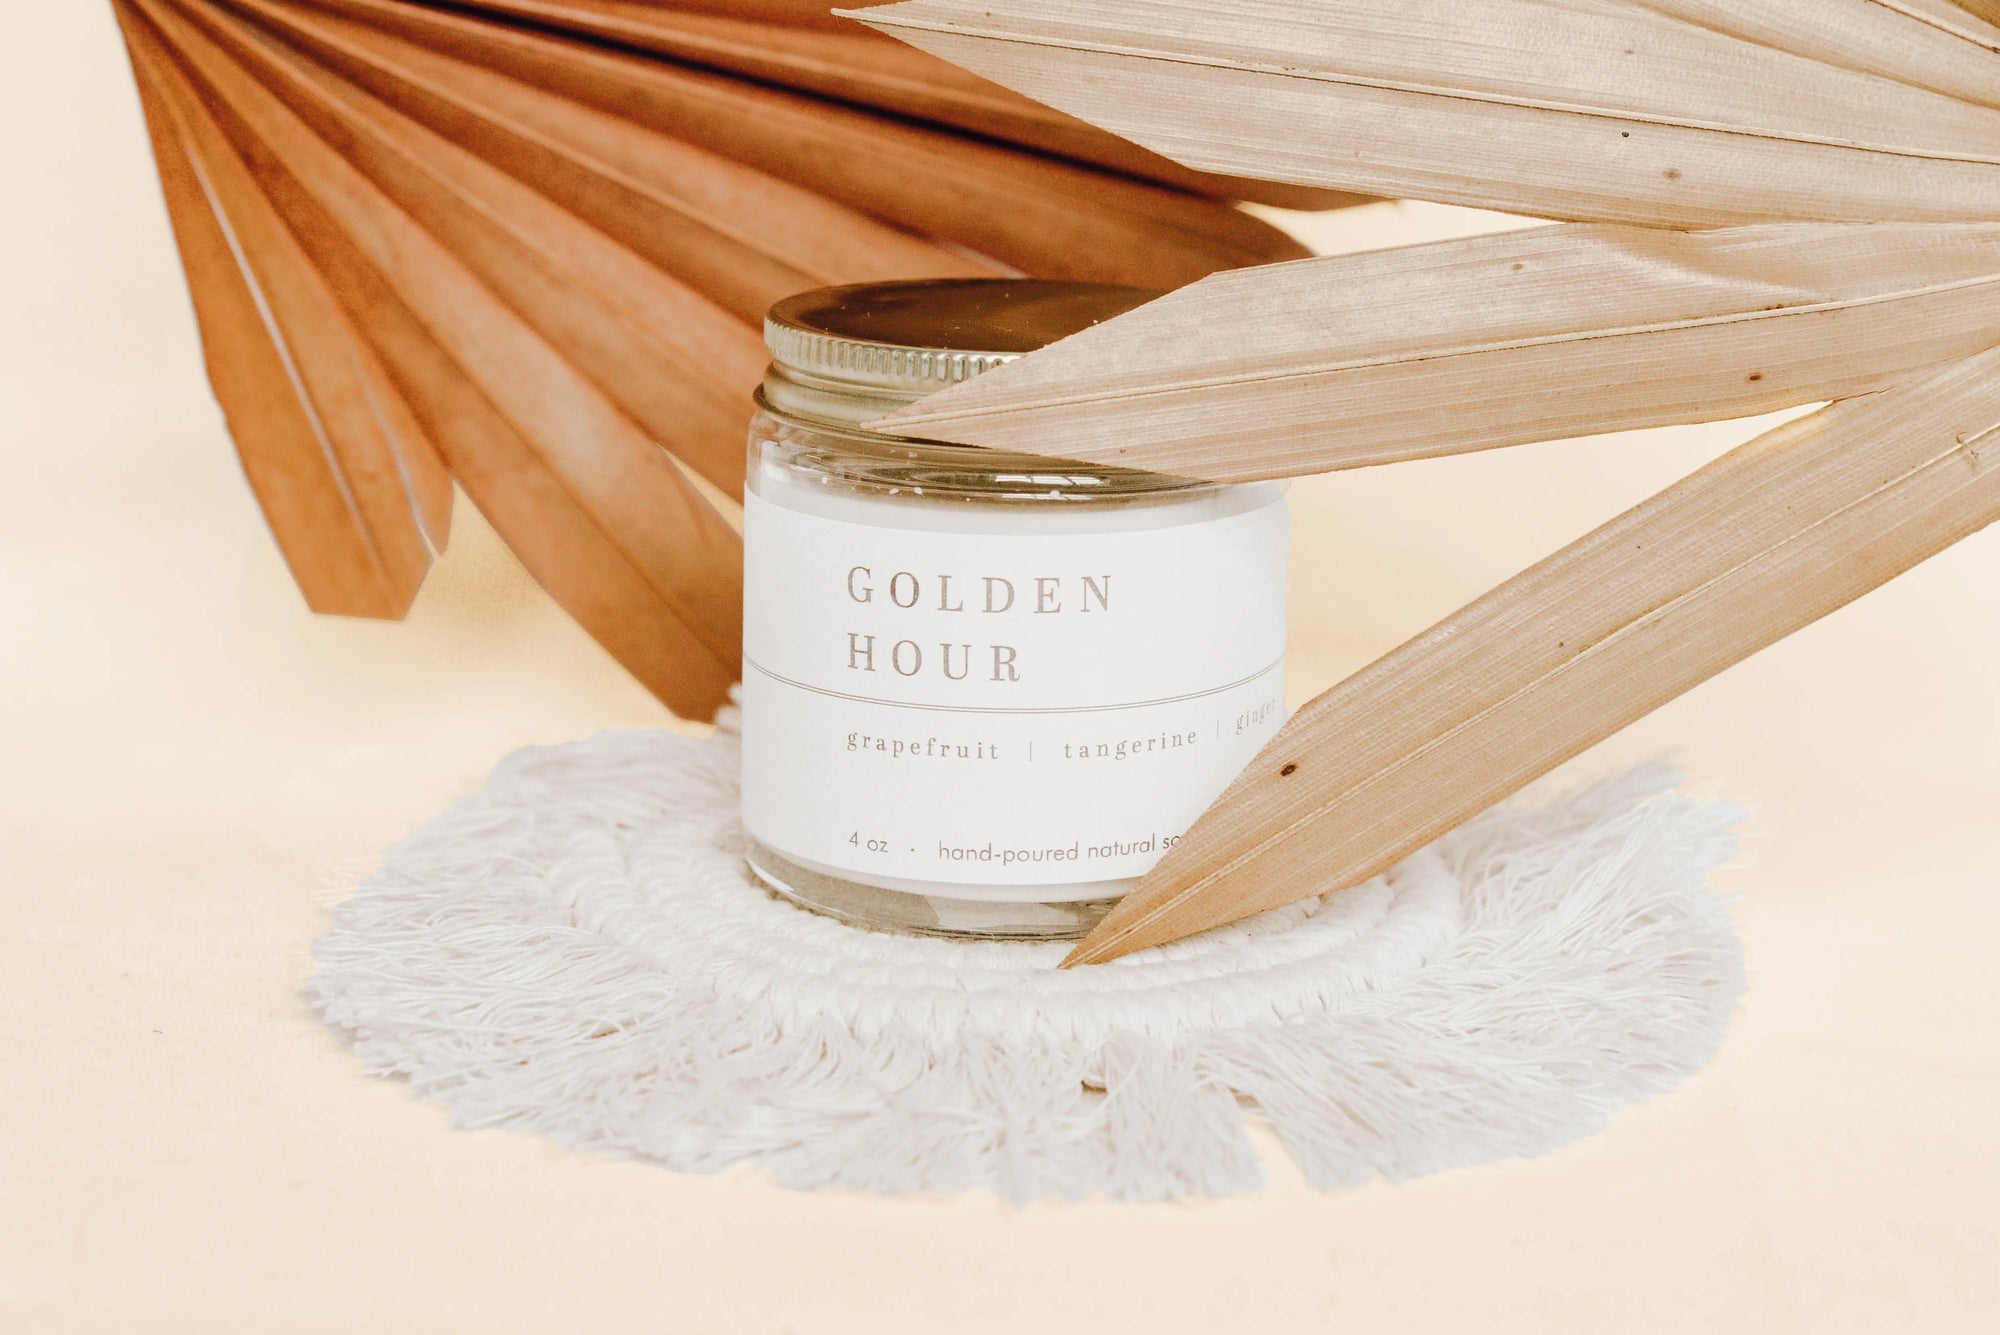 The Golden Hour Candle by Vellabox